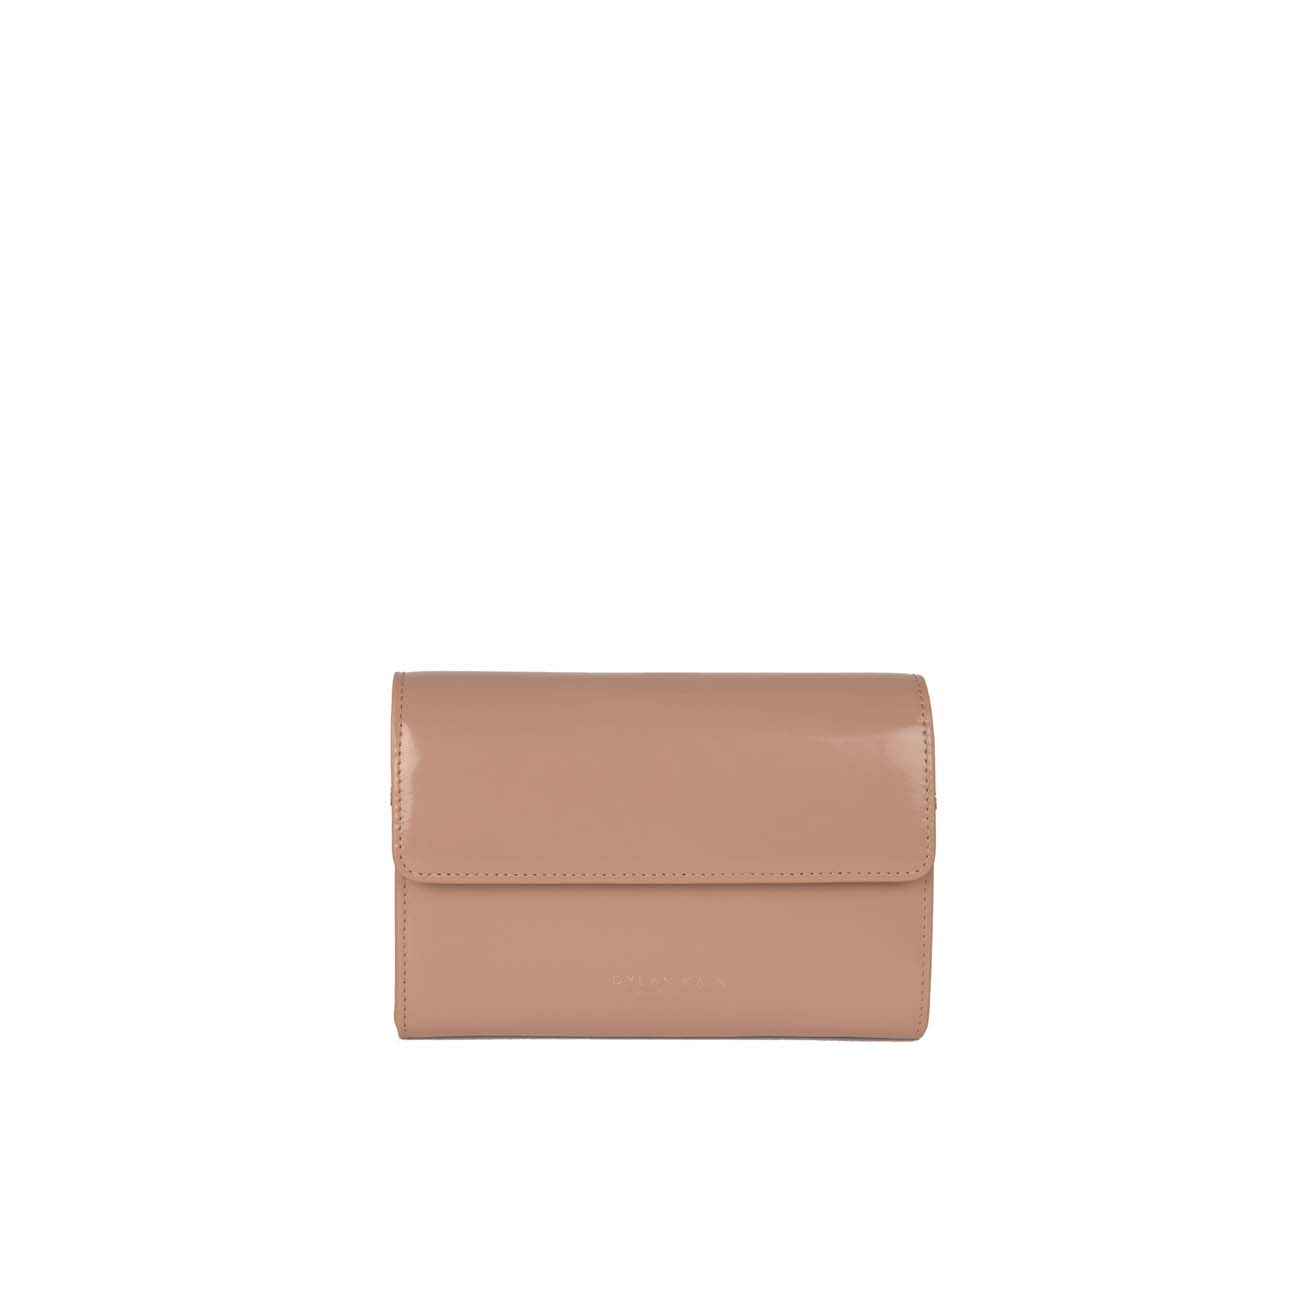 The Juicy Patent Phone Wallet Fawn